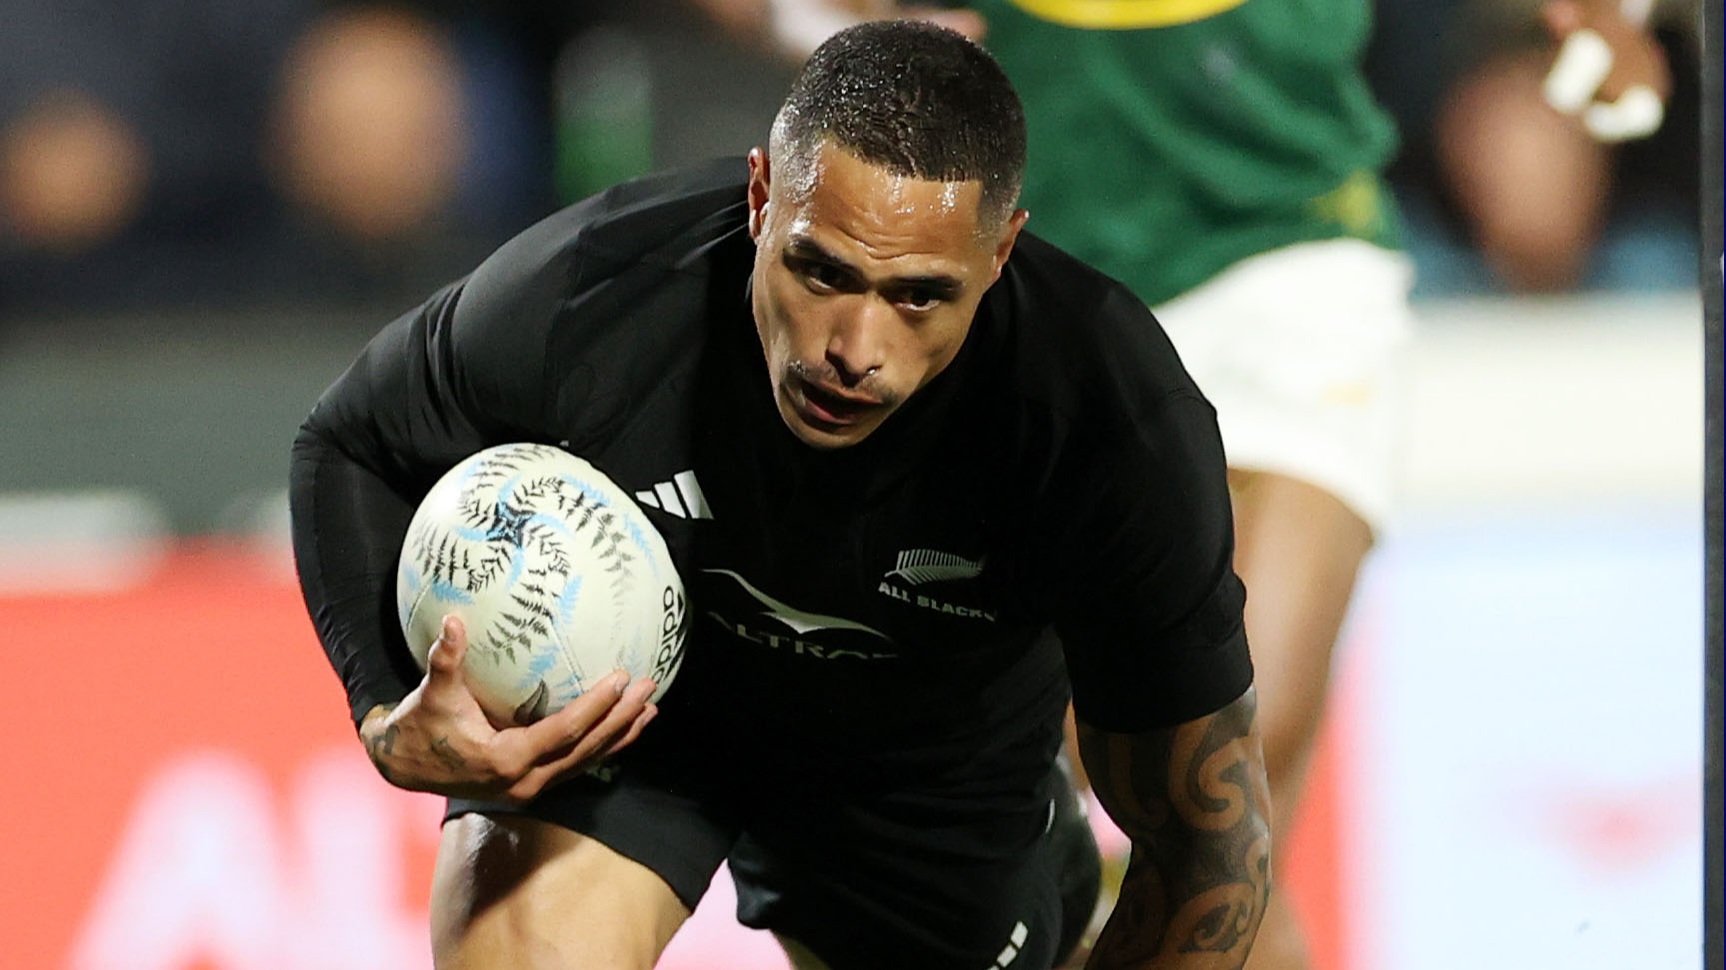 AUCKLAND, NEW ZEALAND - JULY 15: Aaron Smith of the All Blacks  scores a try during The Rugby Championship match between the New Zealand All Blacks and South Africa Springboks at Mt Smart Stadium on July 15, 2023 in Auckland, New Zealand. (Photo by Fiona Goodall/Getty Images)